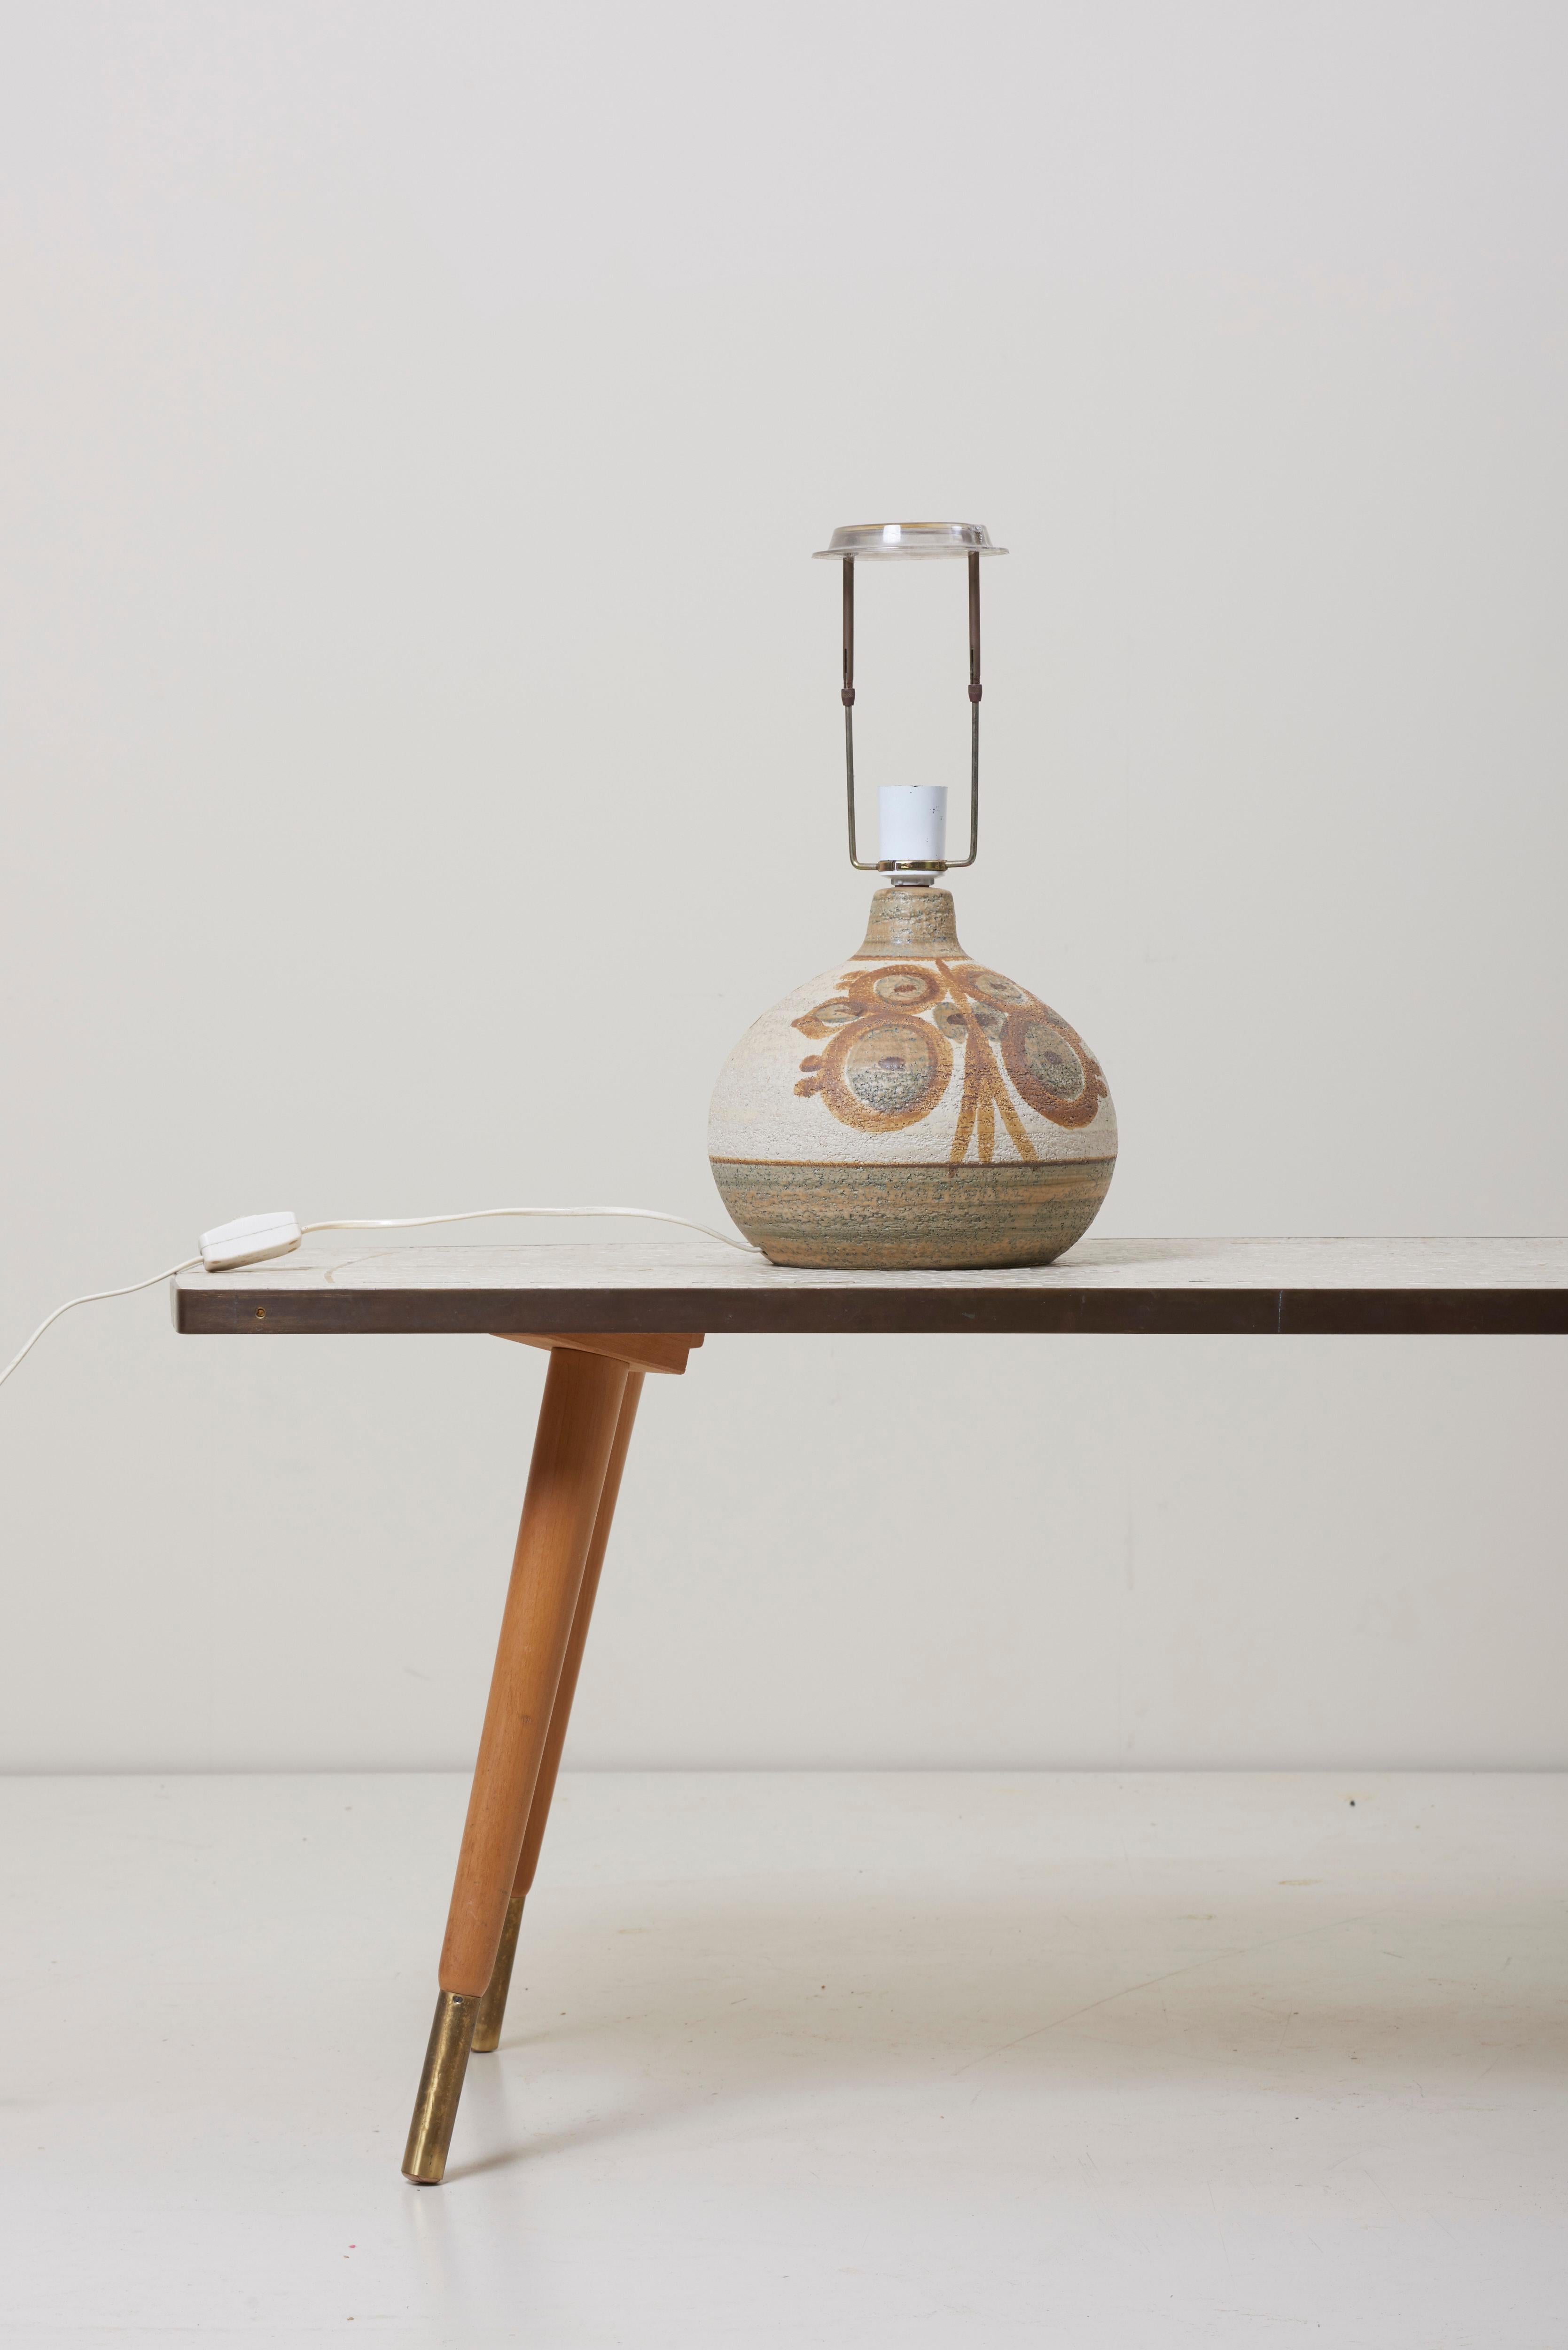 Single table lamp by Soholm, Denmark (marked).
Made of ceramic. Without lamp shade.
1 x E27 / type A bulb.

To be on the safe side, the lamp should be checked locally by a specialist concerning local requirements.